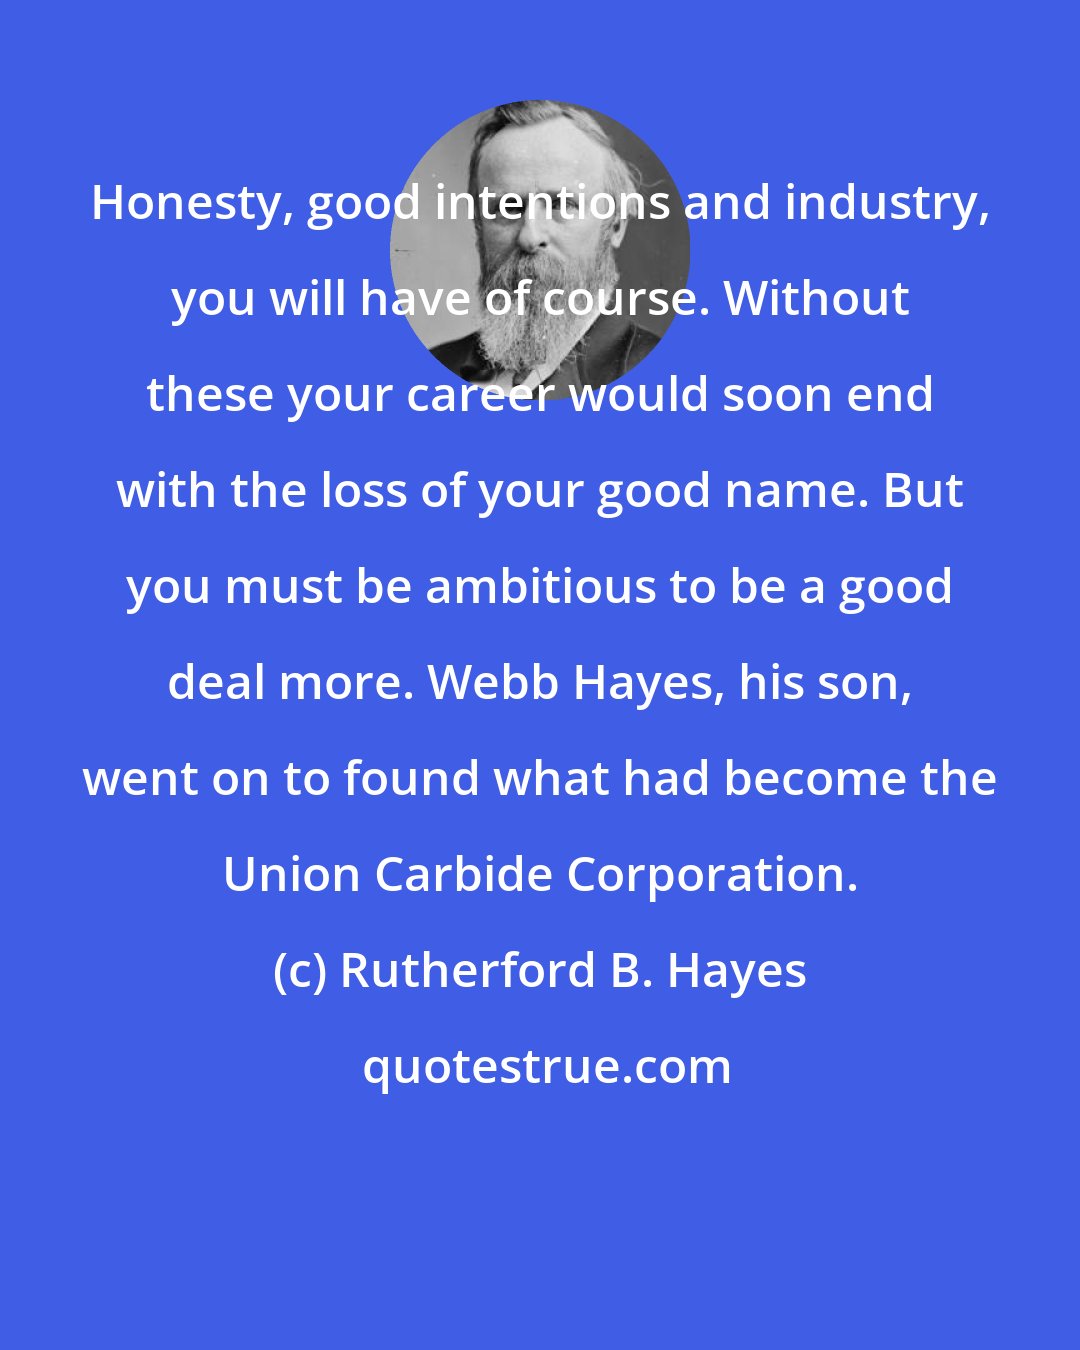 Rutherford B. Hayes: Honesty, good intentions and industry, you will have of course. Without these your career would soon end with the loss of your good name. But you must be ambitious to be a good deal more. Webb Hayes, his son, went on to found what had become the Union Carbide Corporation.